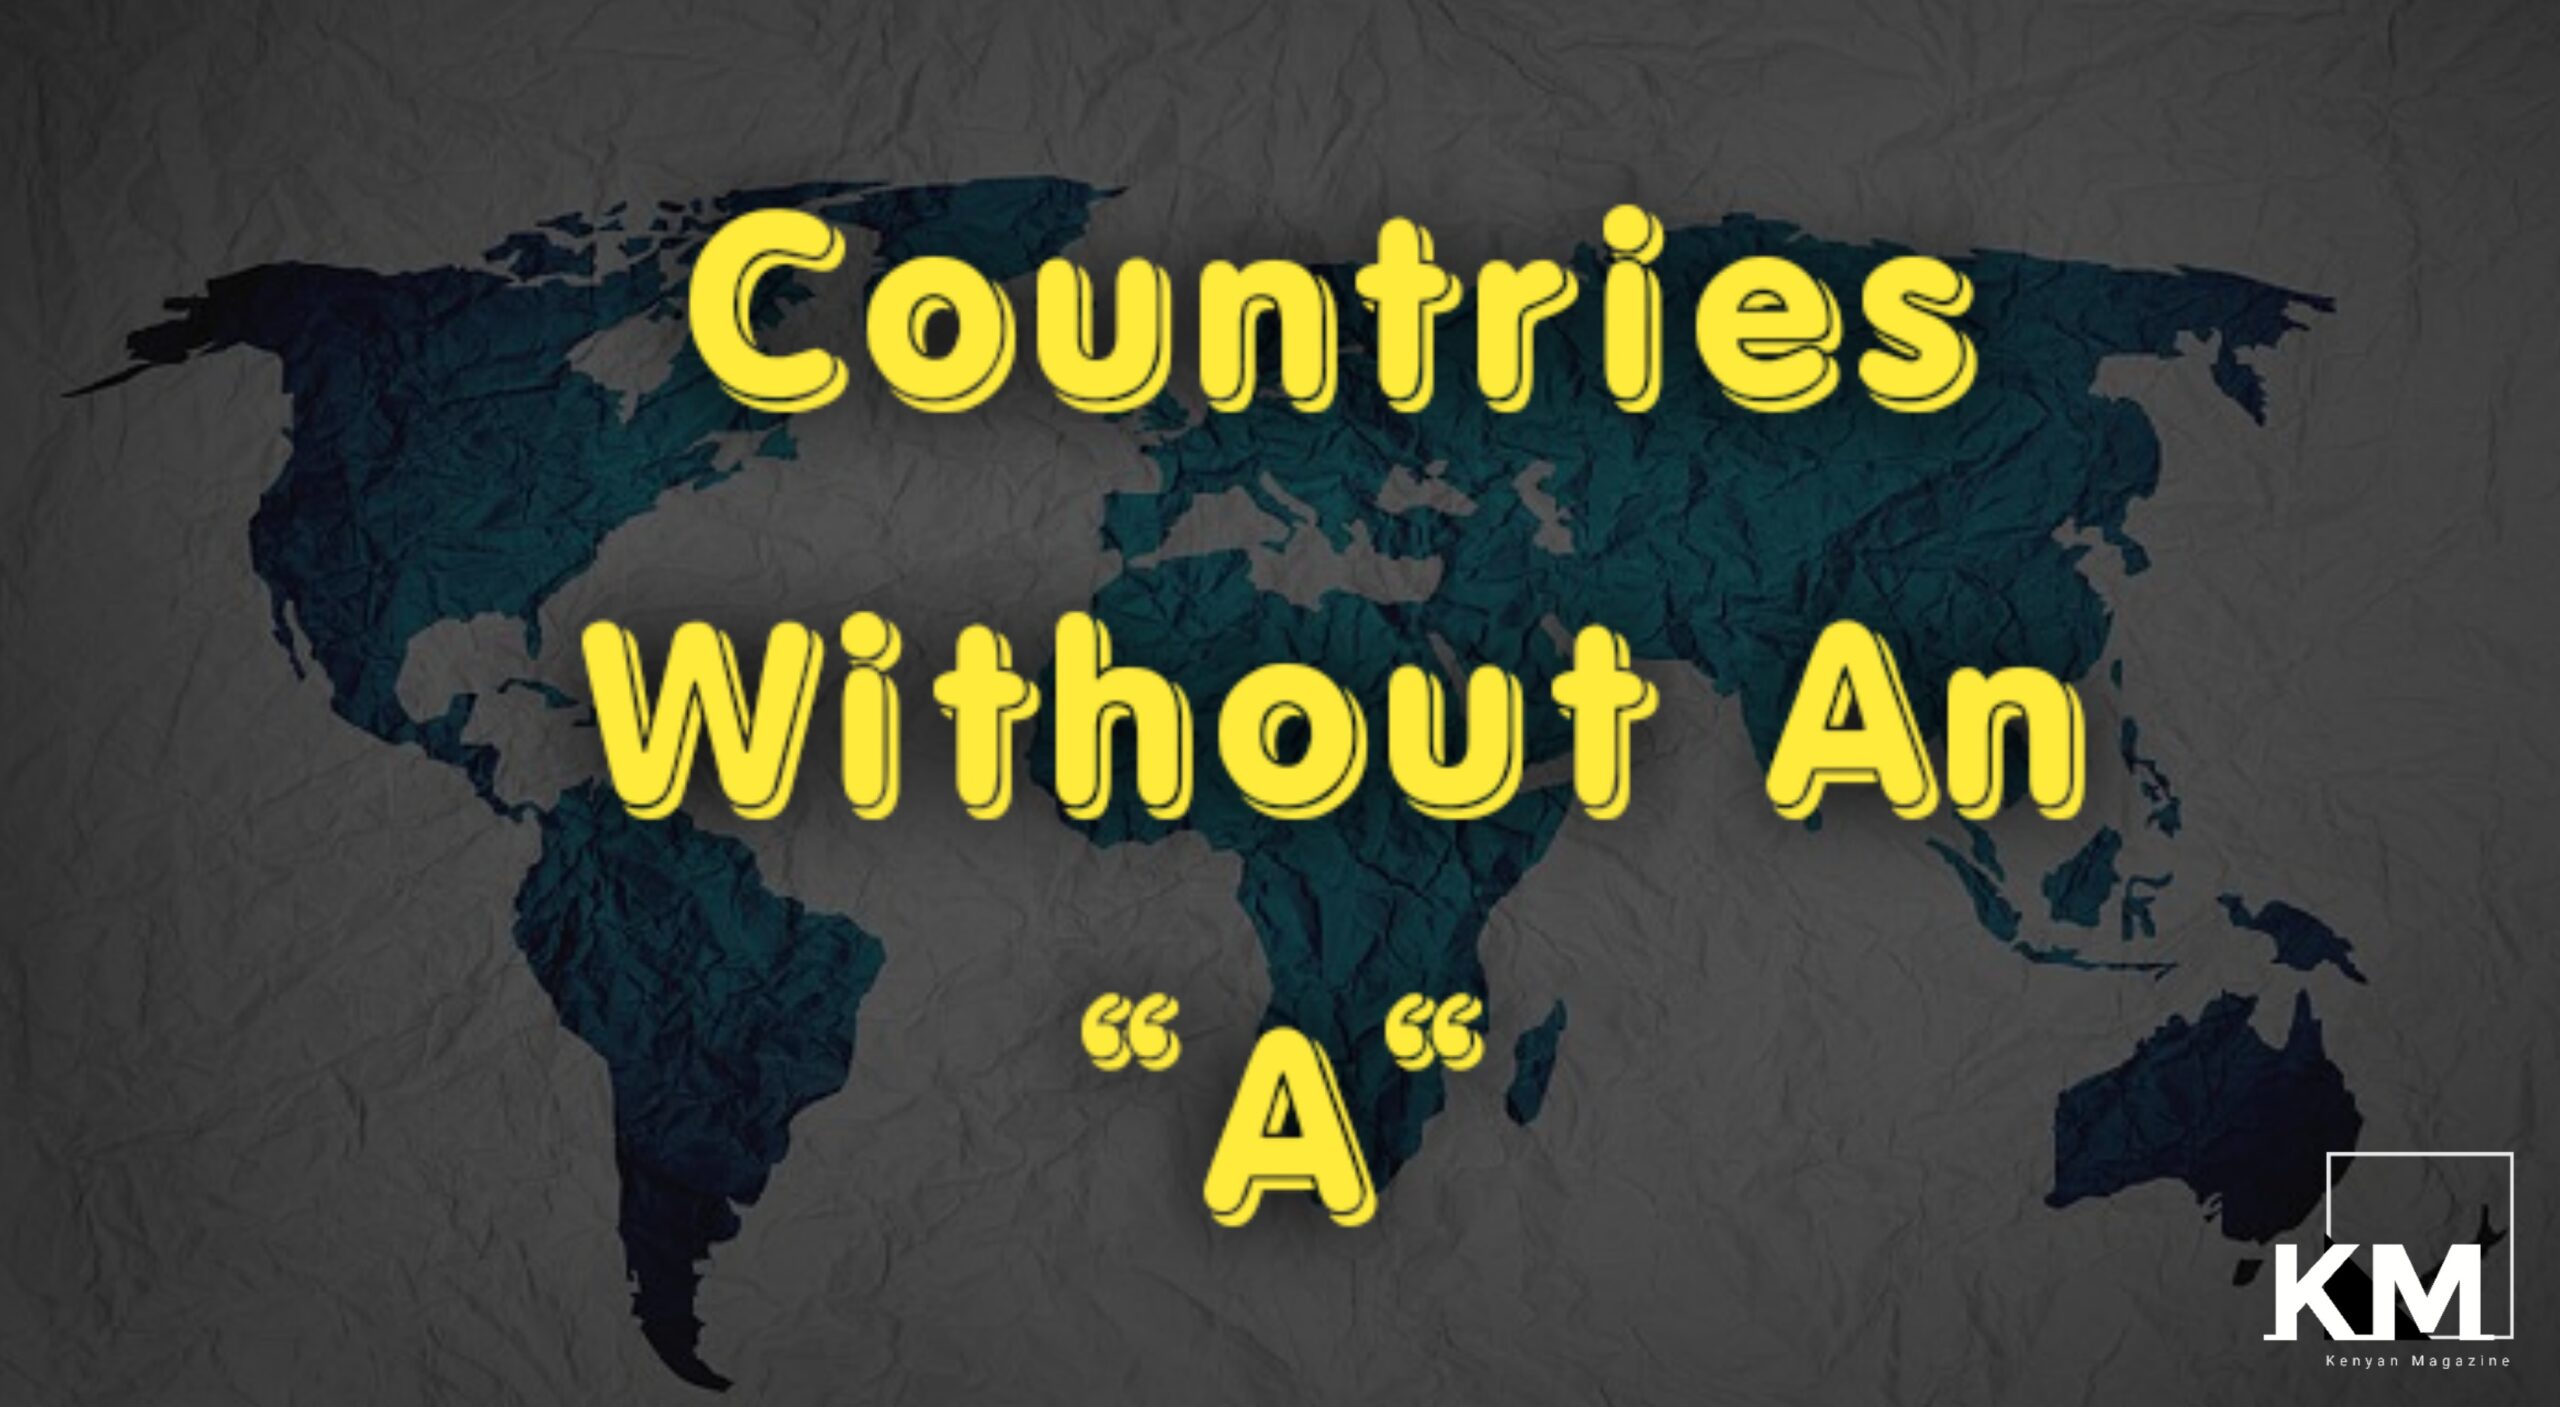 Countries Without an A